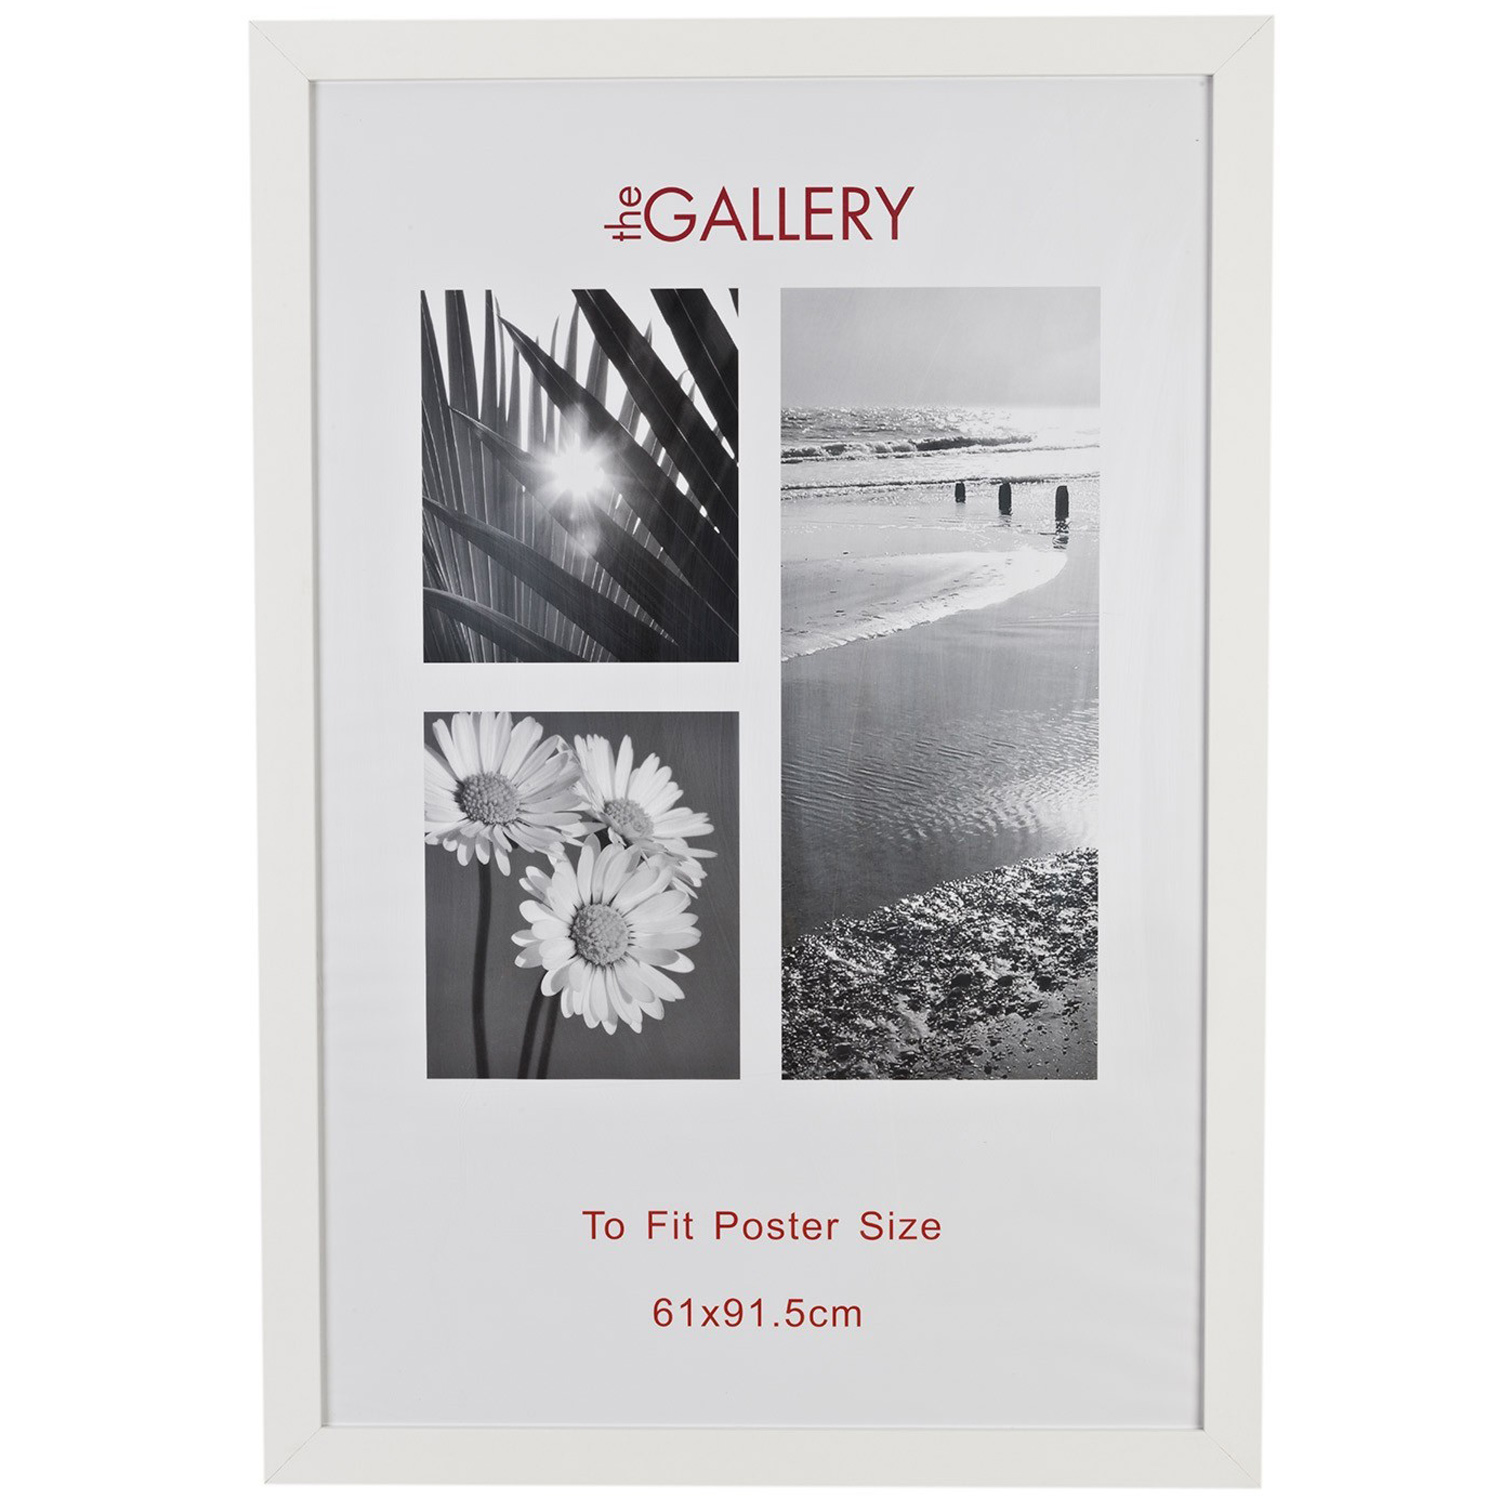 The Gallary White Large Poster Frame 36 x 24 inch Image